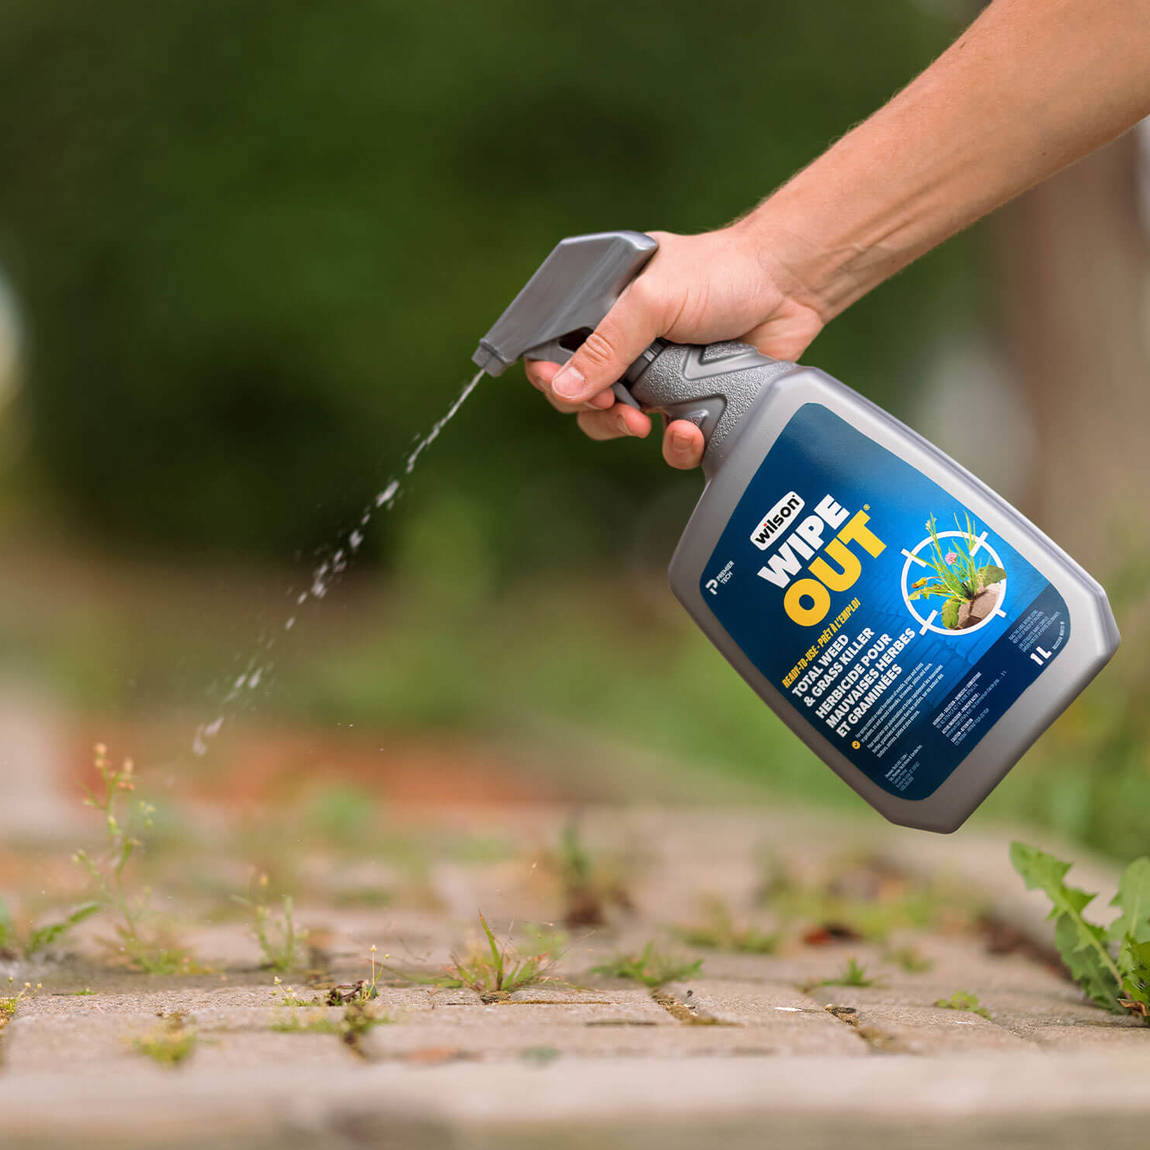 Spraying Pesticide With Portable Sprayer To Eradicate Garden Weeds In The  Lawn Weedicide Spray On The Weeds In The Garden Pesticide Use Is Hazardous  To Health Stock Photo - Download Image Now 